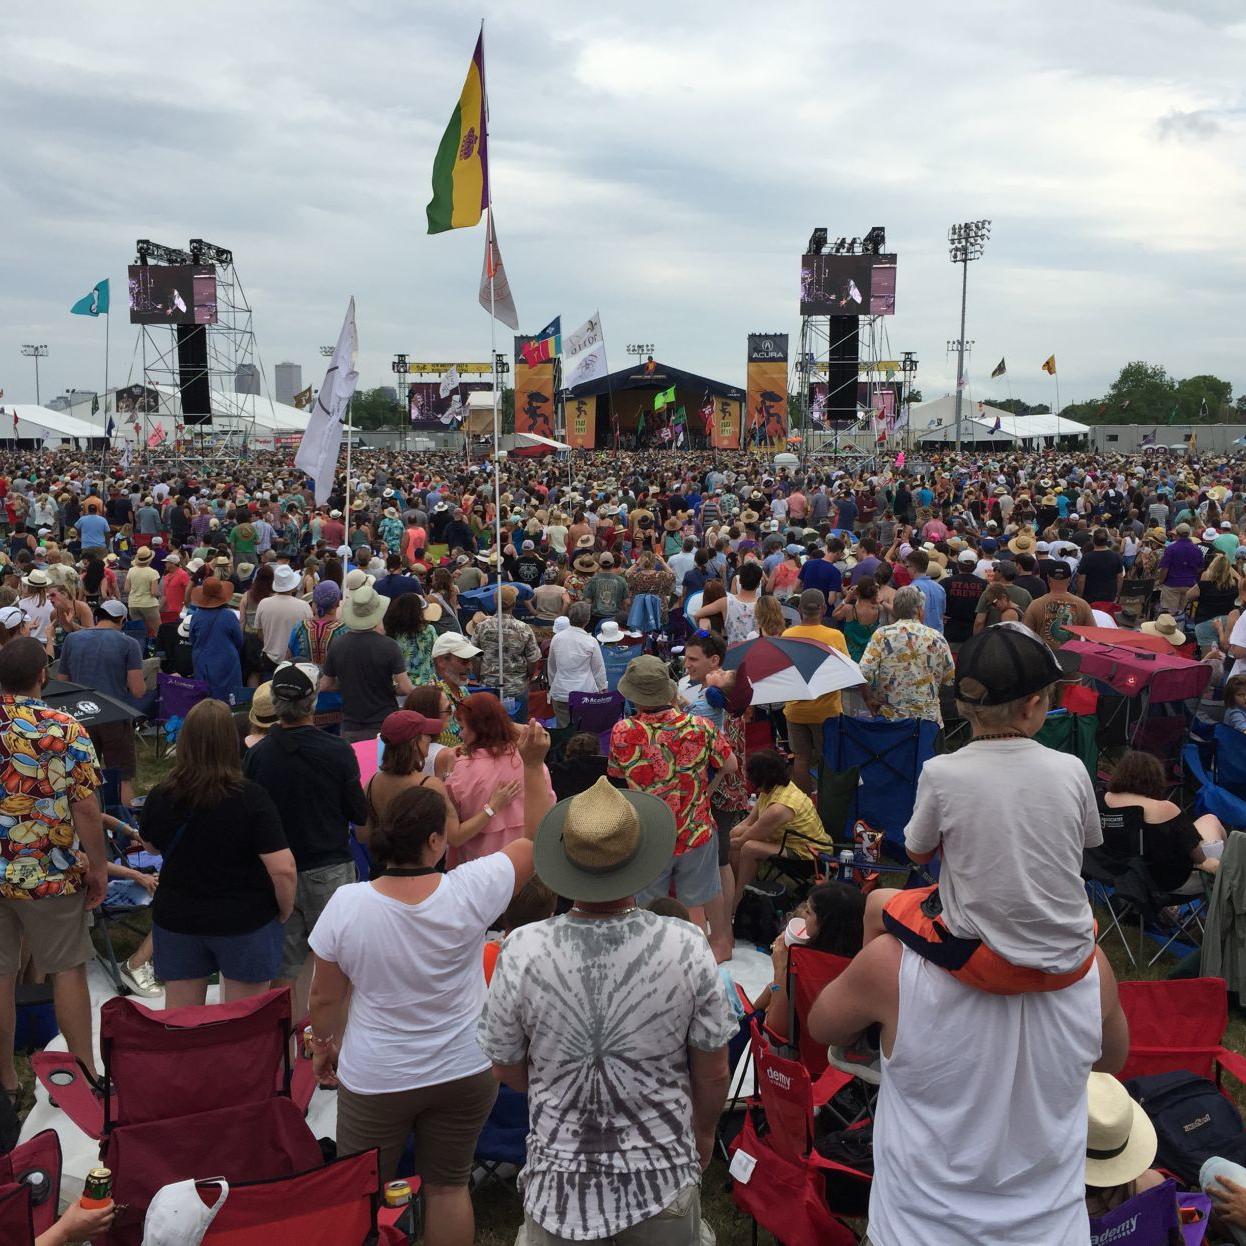 Jazz Fest Schedule 2022 2022 New Orleans Jazz Fest Lineup Is Out Thursday; Who Will, Or Won't, Be  On The List? | Louisiana Festivals | Nola.com